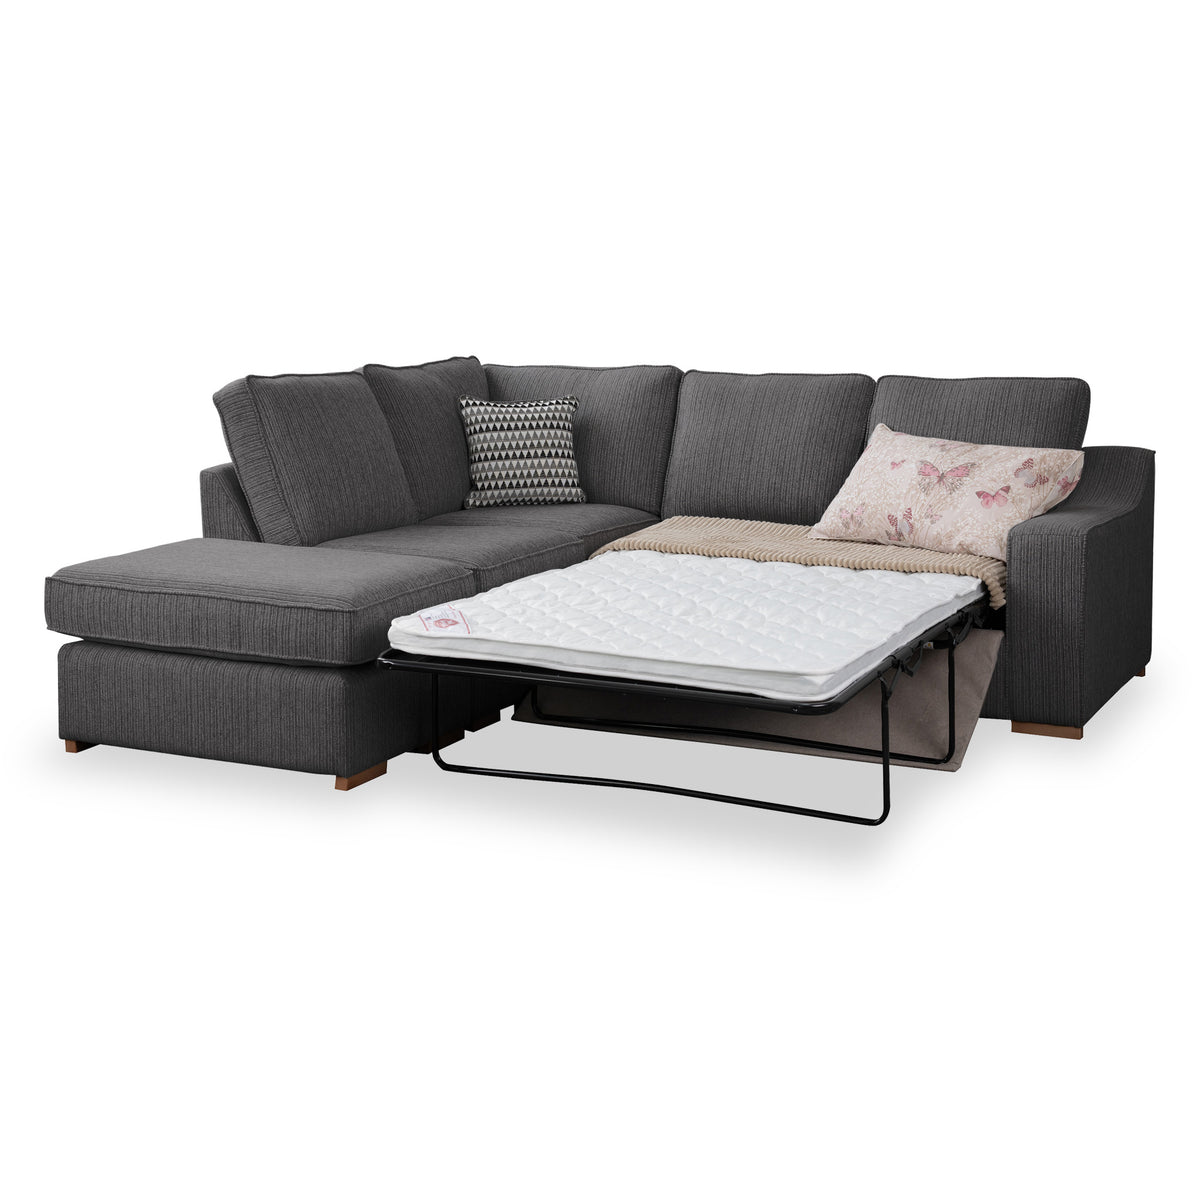 Ashow Charcoal Left Hand Corner Sofabed with Maika Dusk Scatter Cushions from Roseland furniture